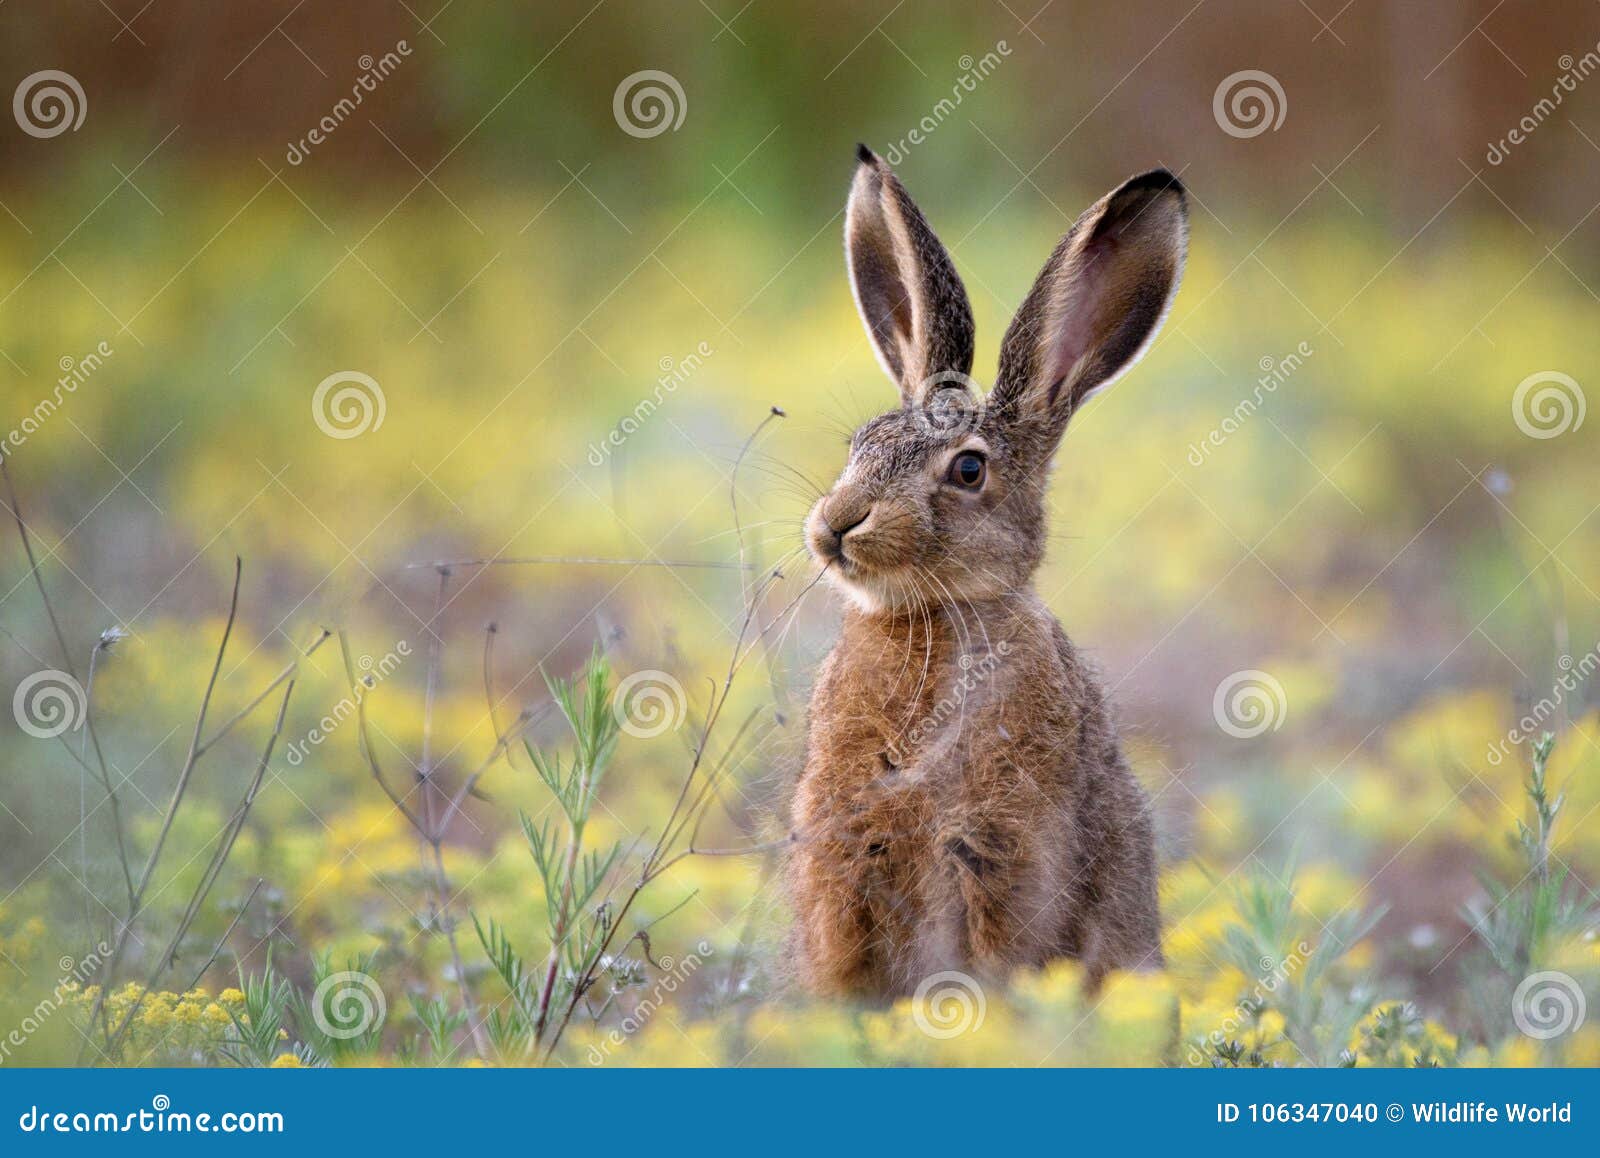 european hare stands in the grass and looking at the camera